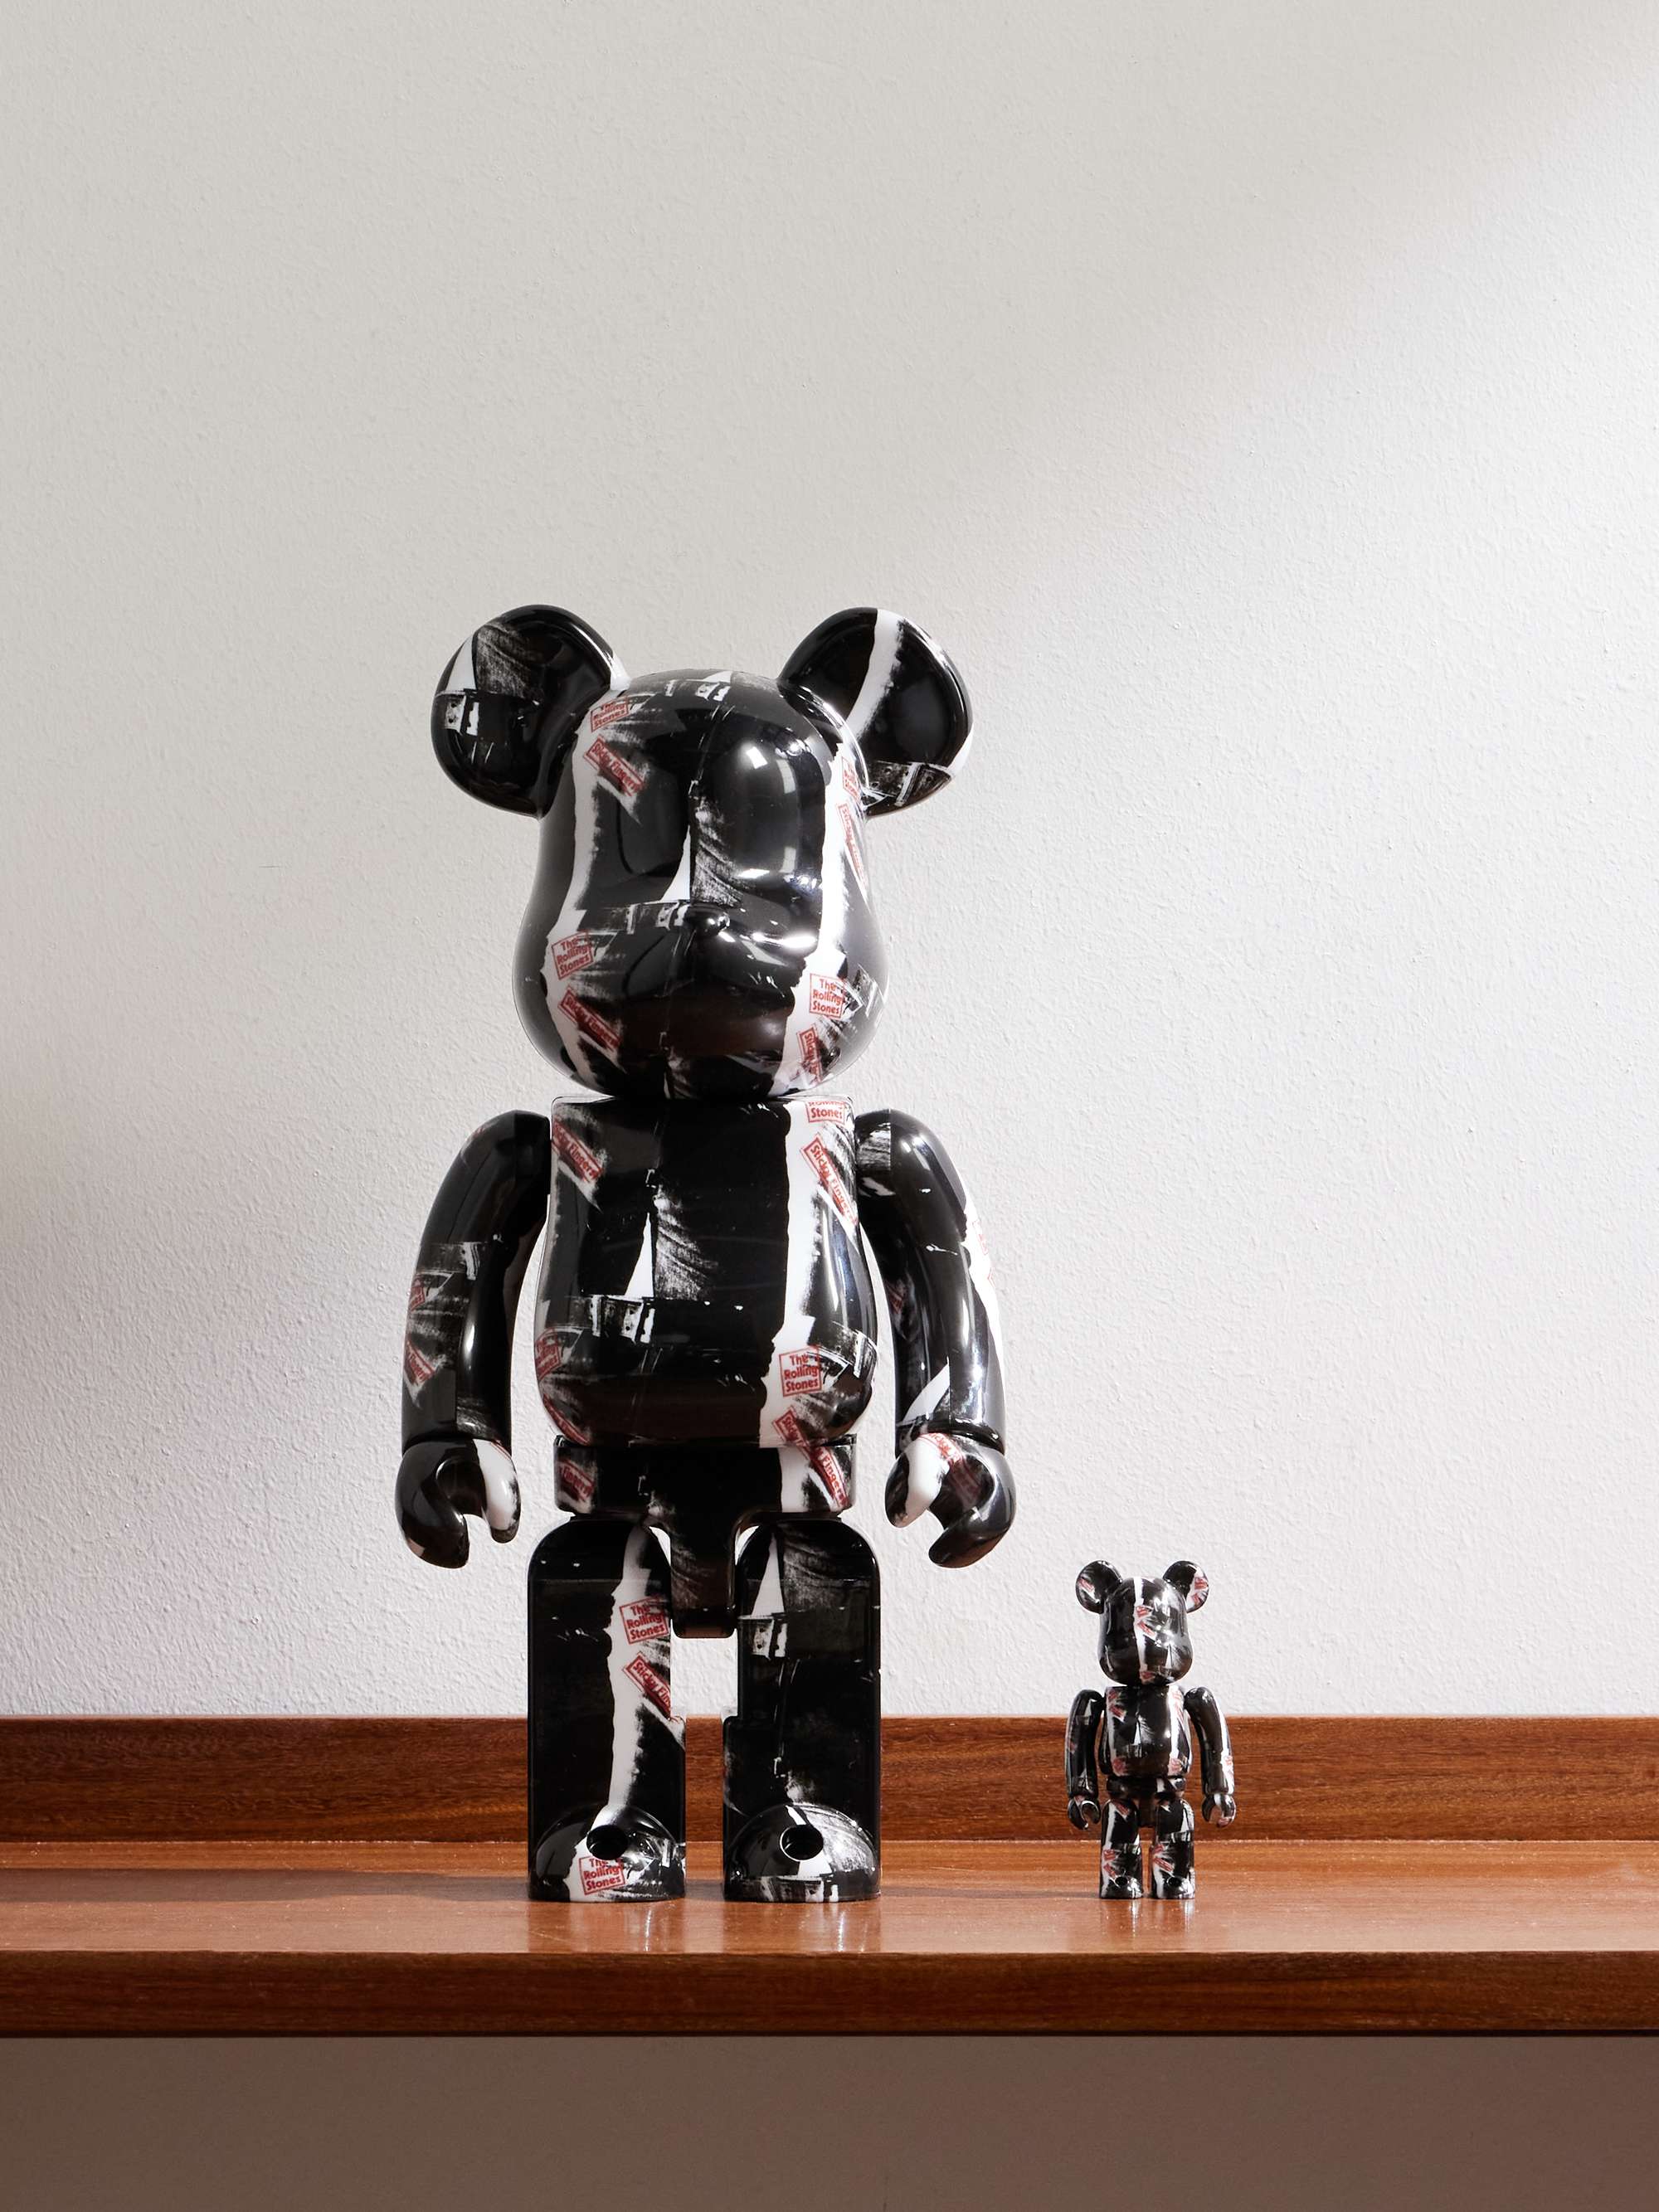 BE@RBRICK + Andy Warhol + The Rolling Stones 100% + 400% Printed